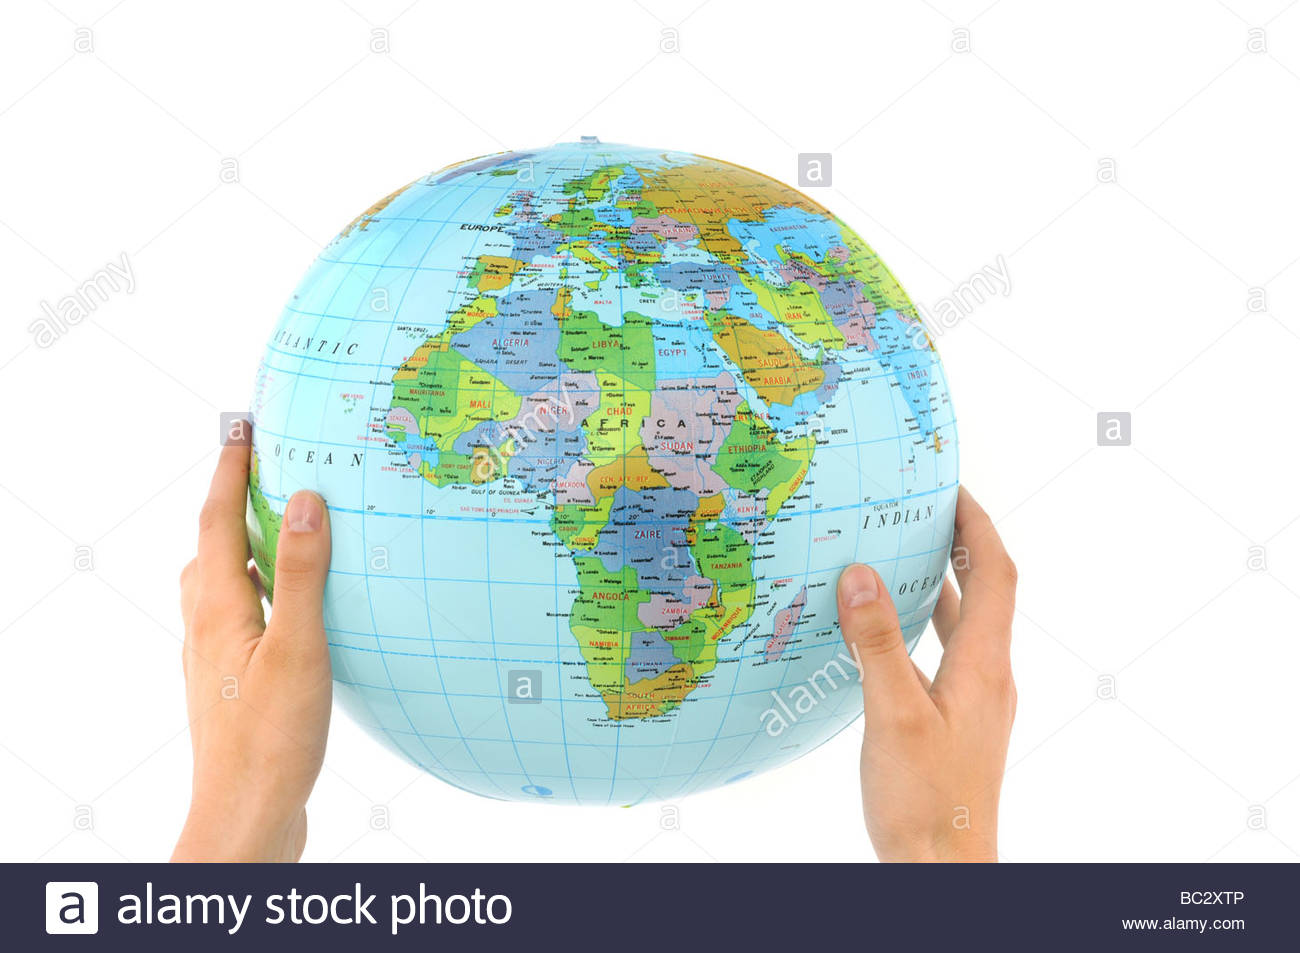 Whole world in my hands Stock Photo, Royalty Free Image: 24651222.